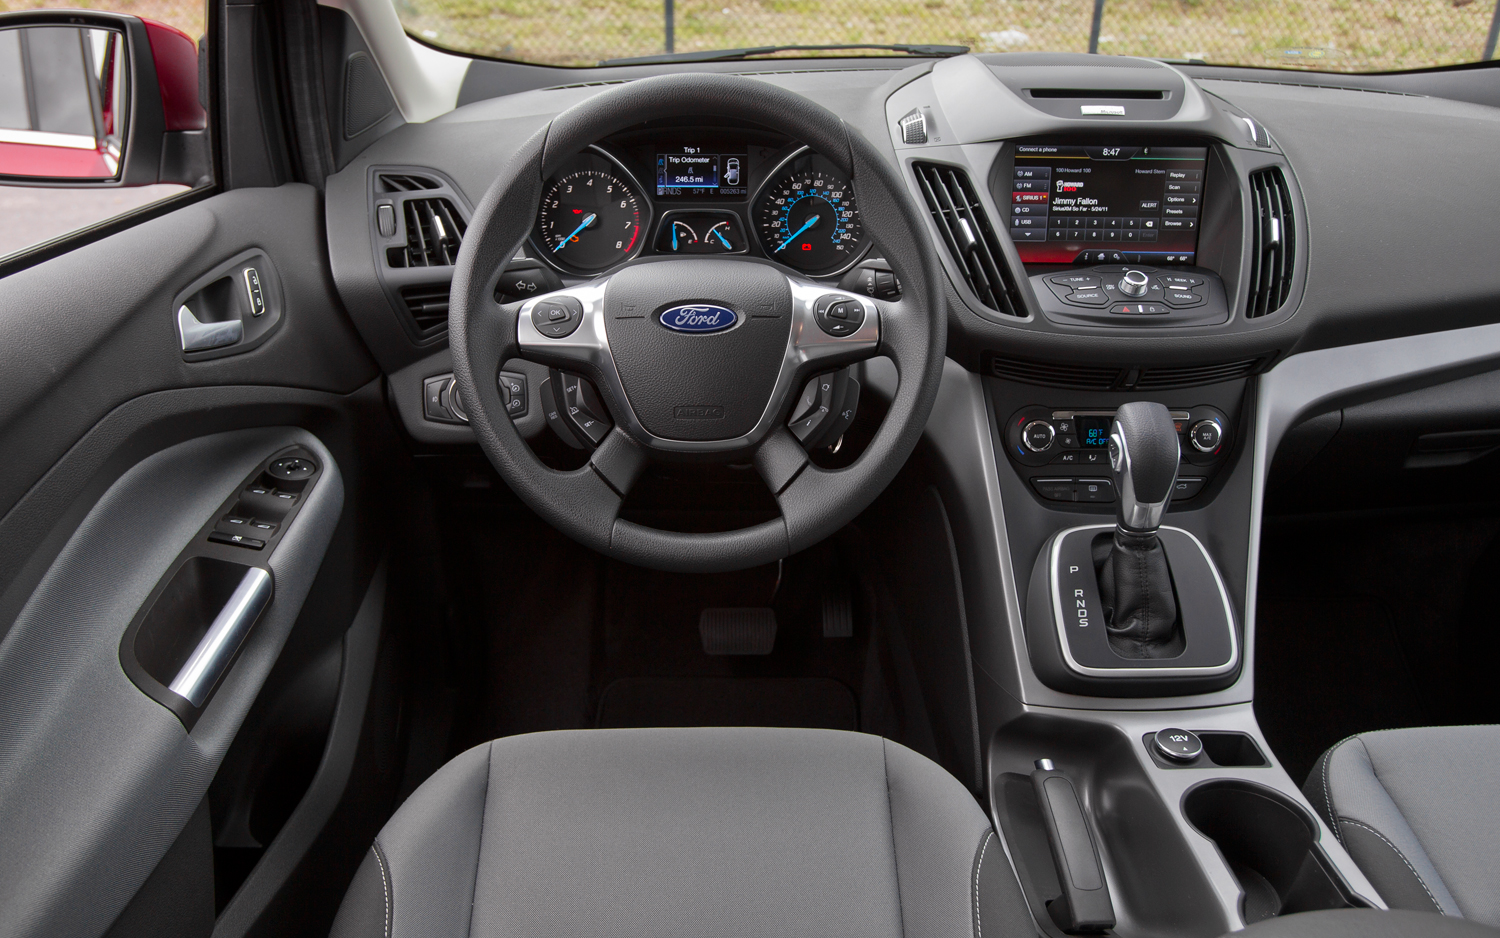 How To Ford Escape Stereo Wiring Diagram